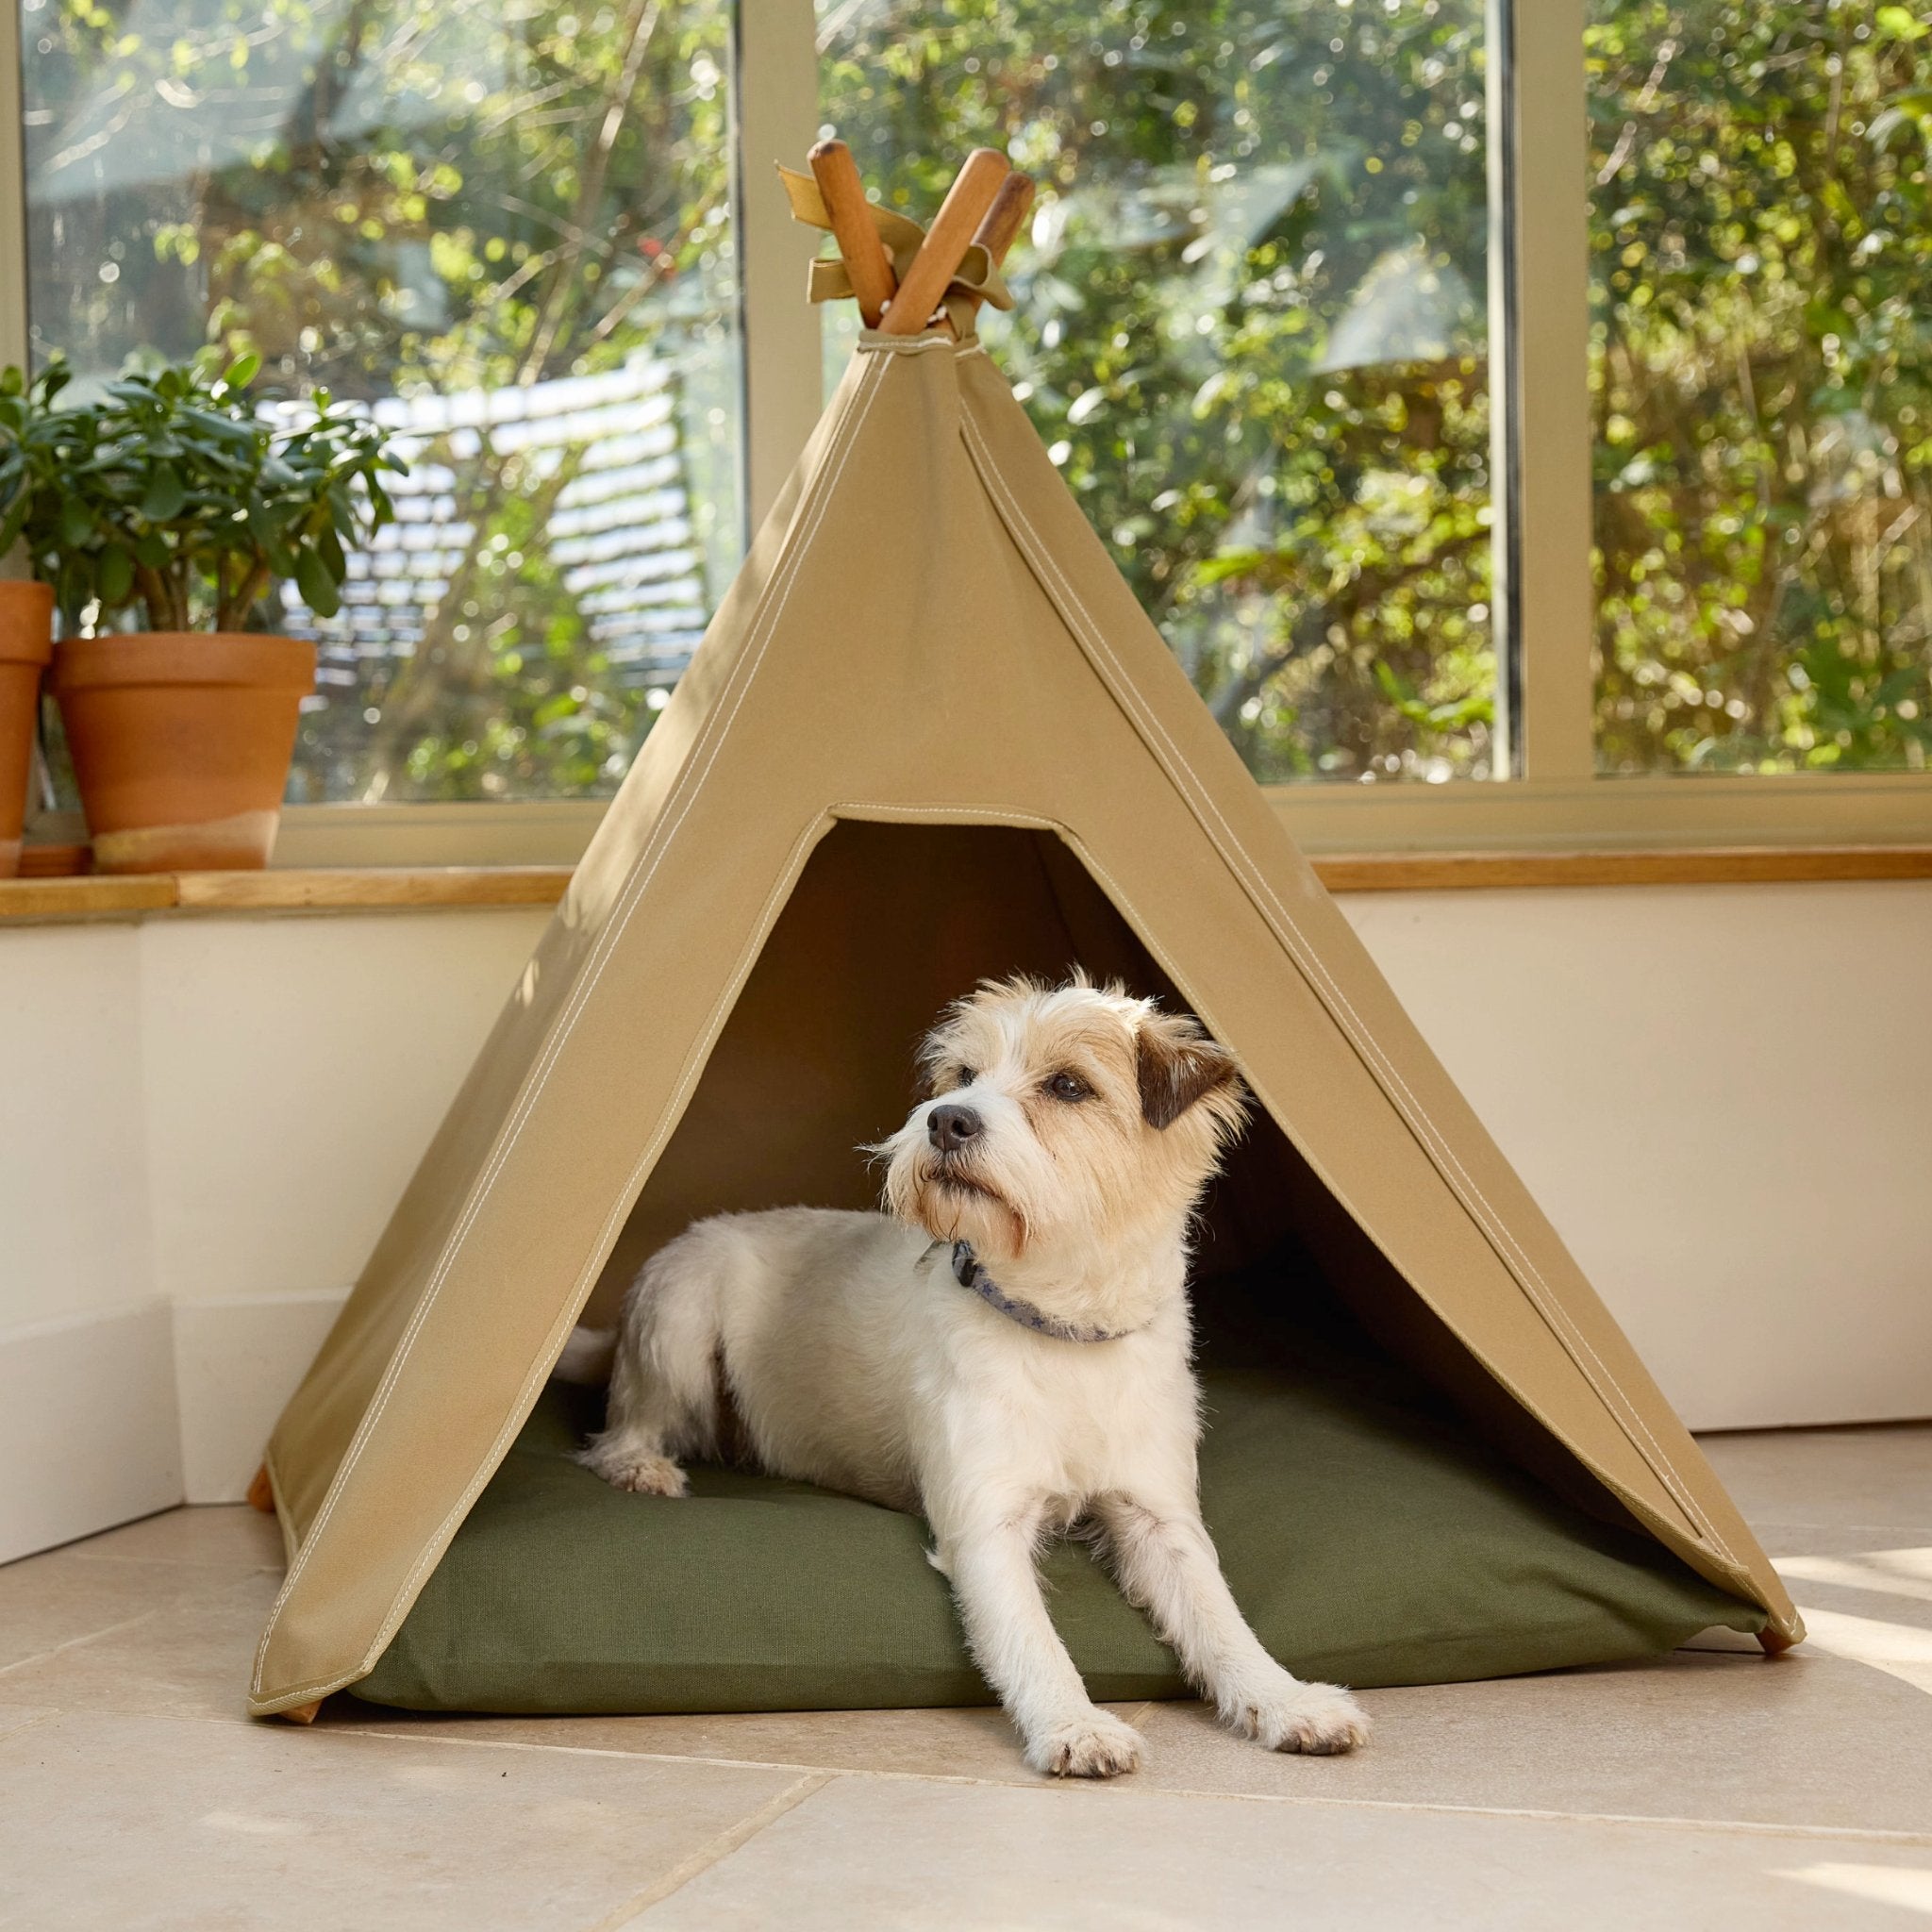 Dog bed. Dog teepee bed in light sand with Jack Russel